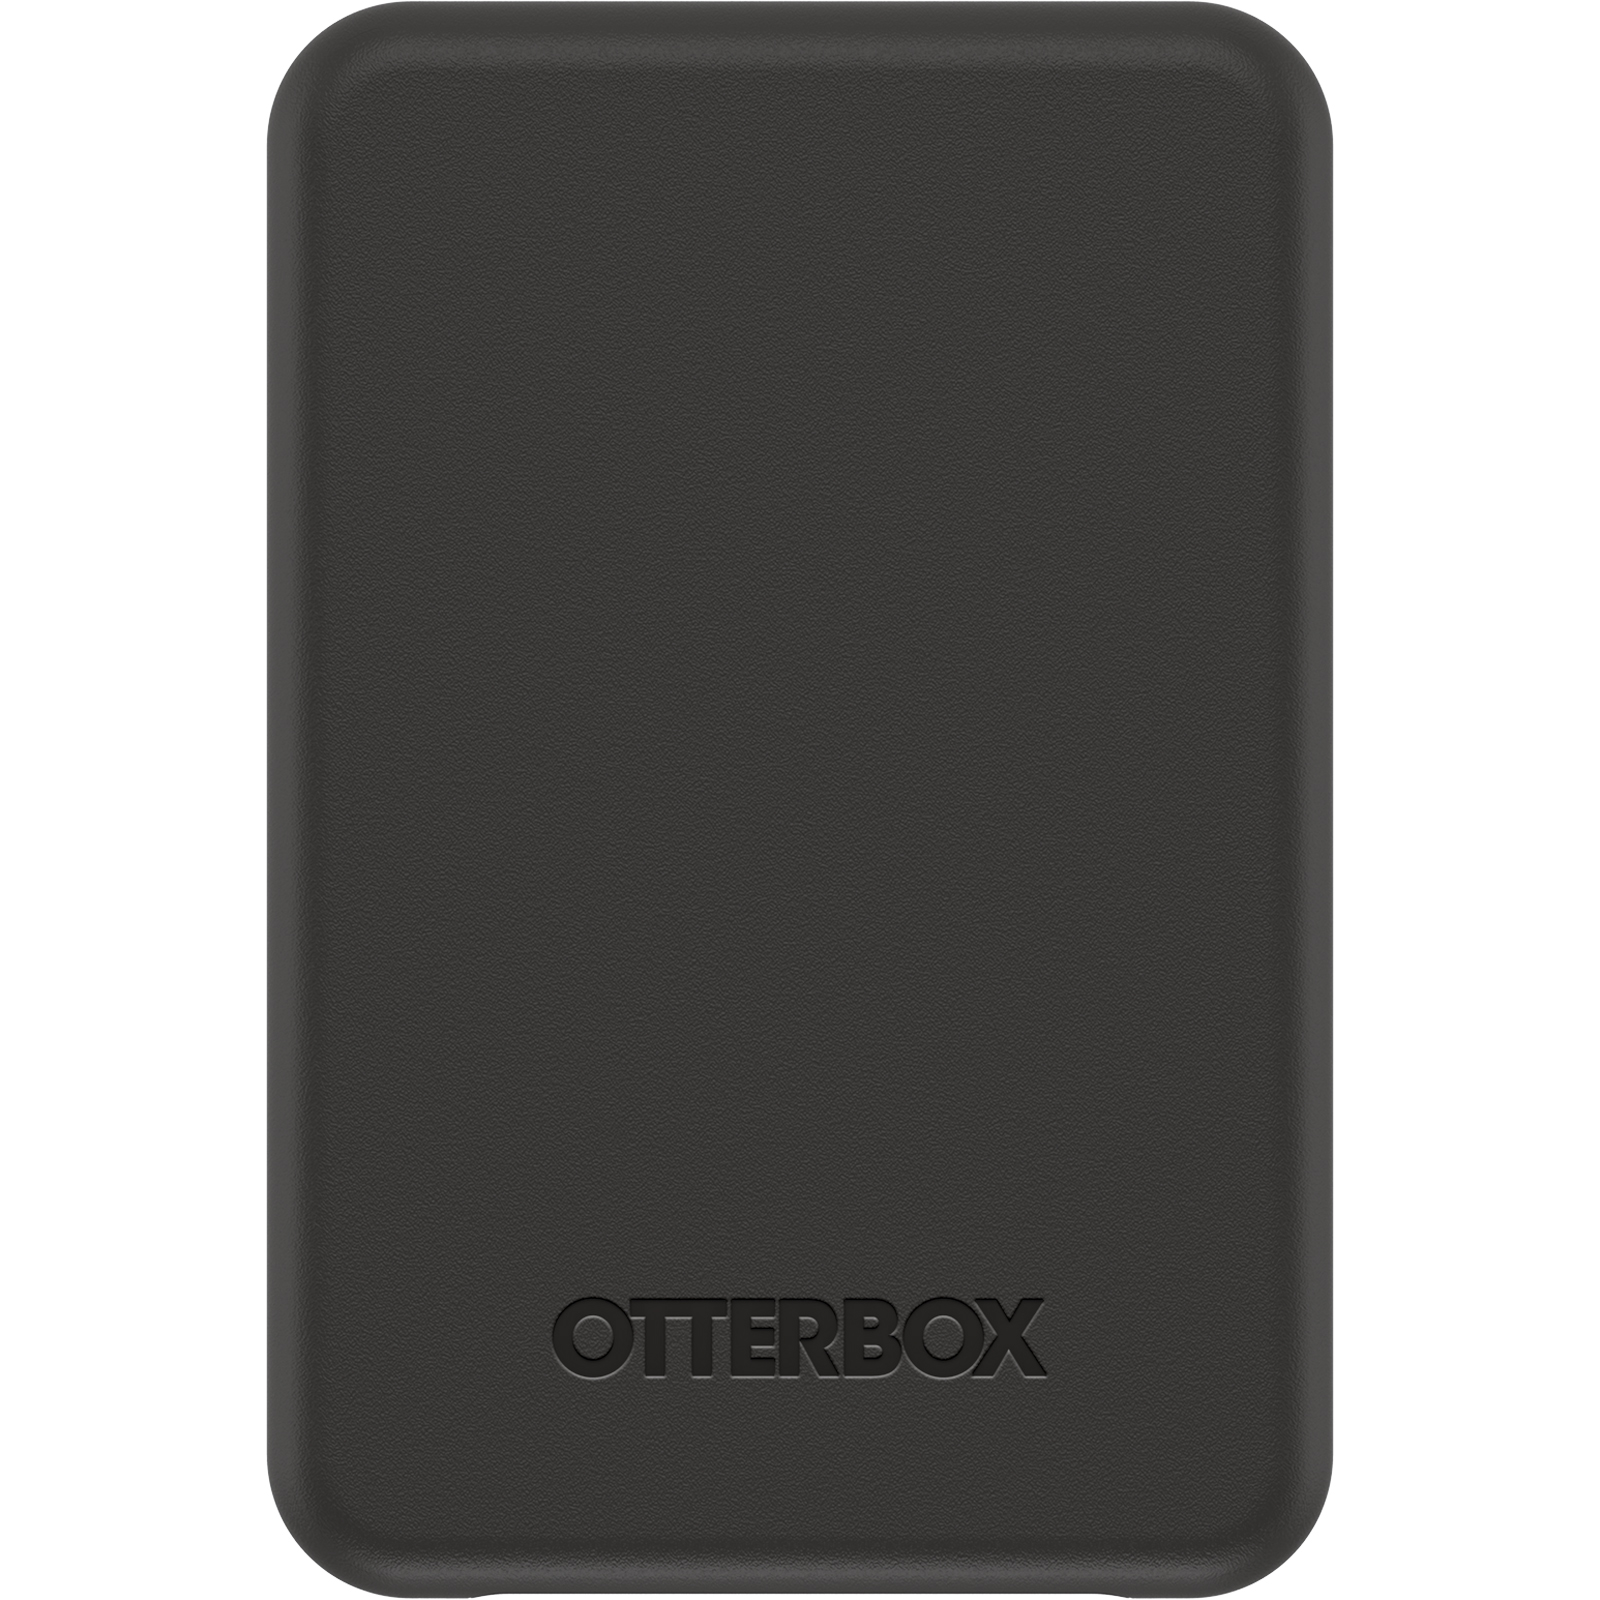 OtterBox Wireless Power Bank for MagSafe 3k mAh For iPhone 3000 mAh 5 V DC  Input Brilliant White - Office Depot